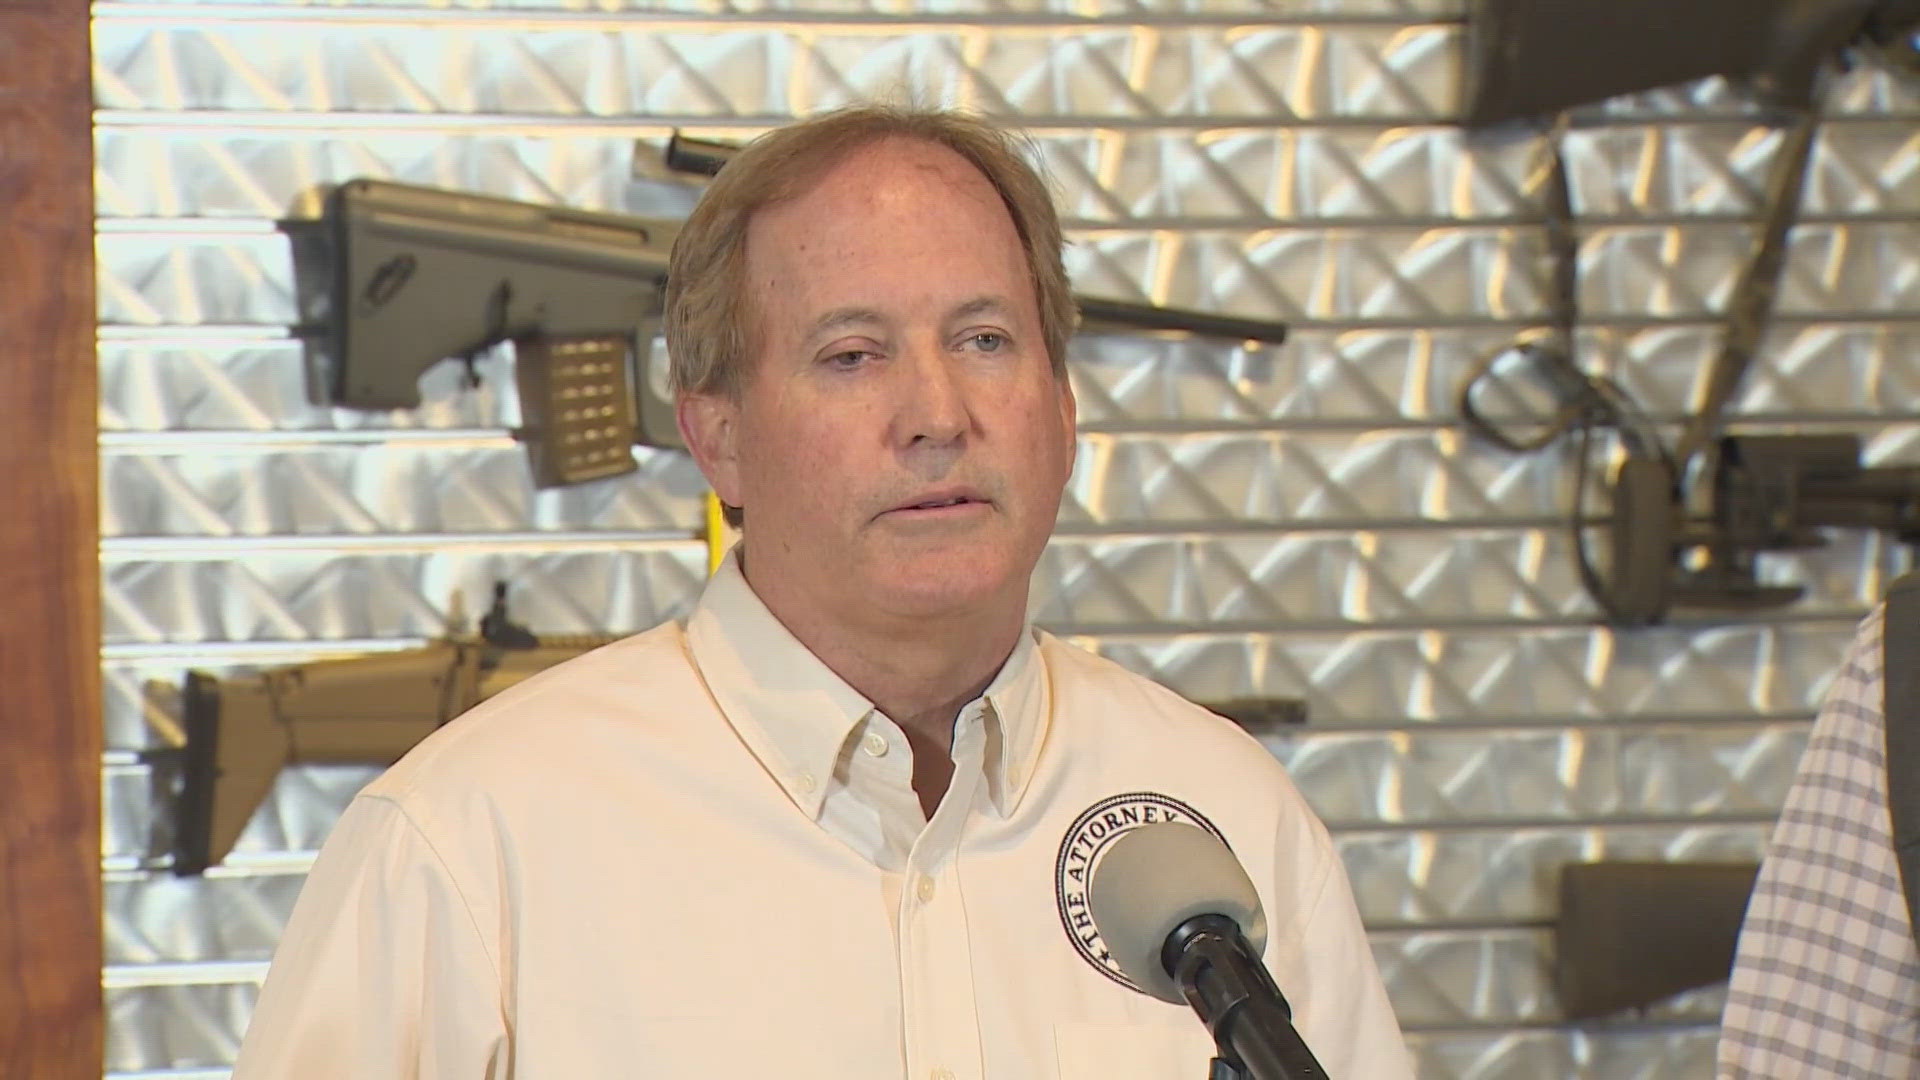 The new rules require background checks for all gun sales transactions. Paxton says it goes too far.